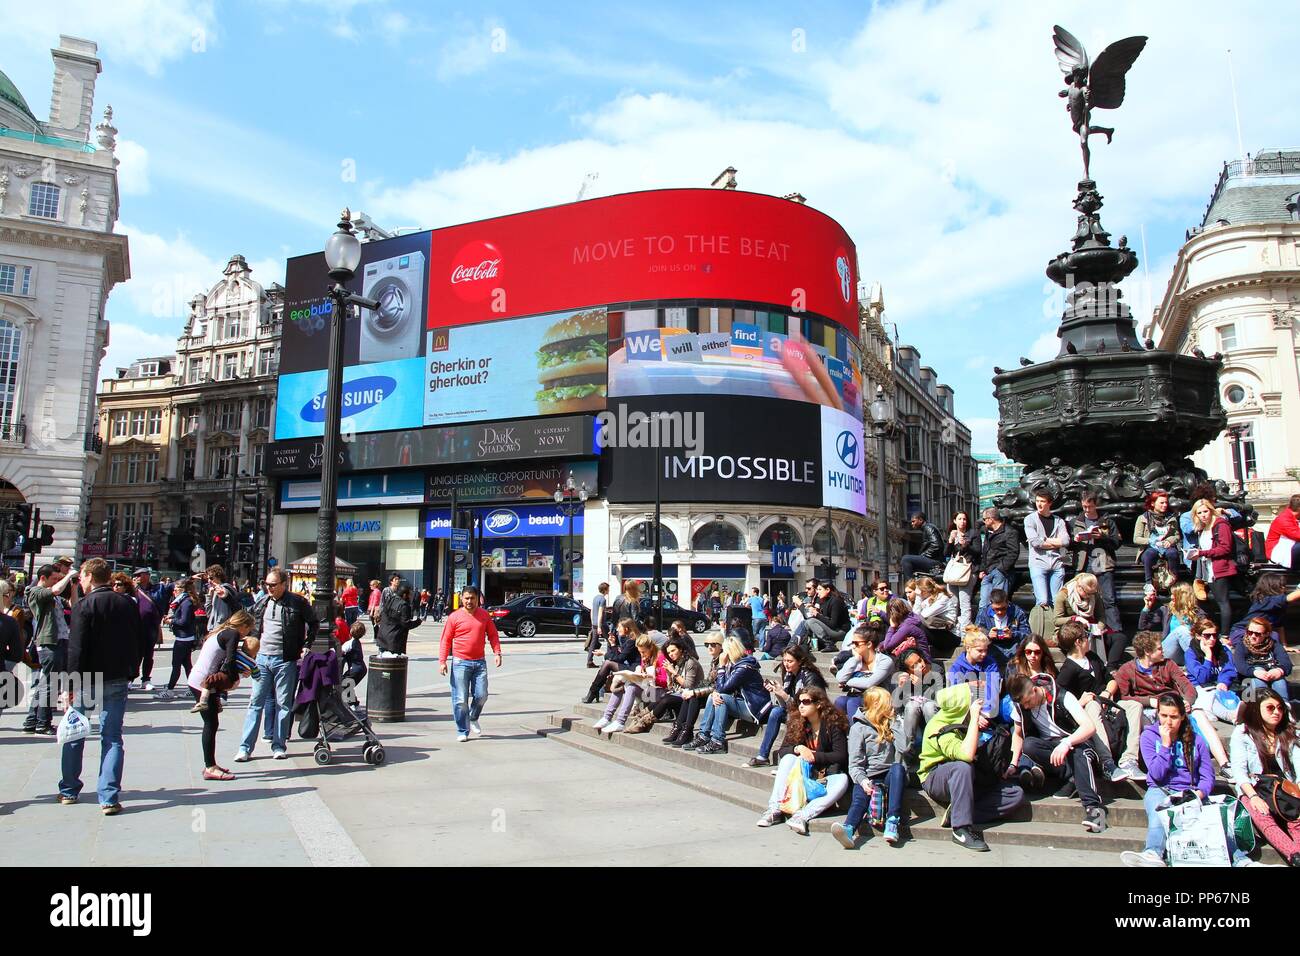 LONDON, UK - MAY 13, 2012: People visit Piccadilly Circus in London. With more than 14 million international arrivals in 2009, London is the most visi Stock Photo